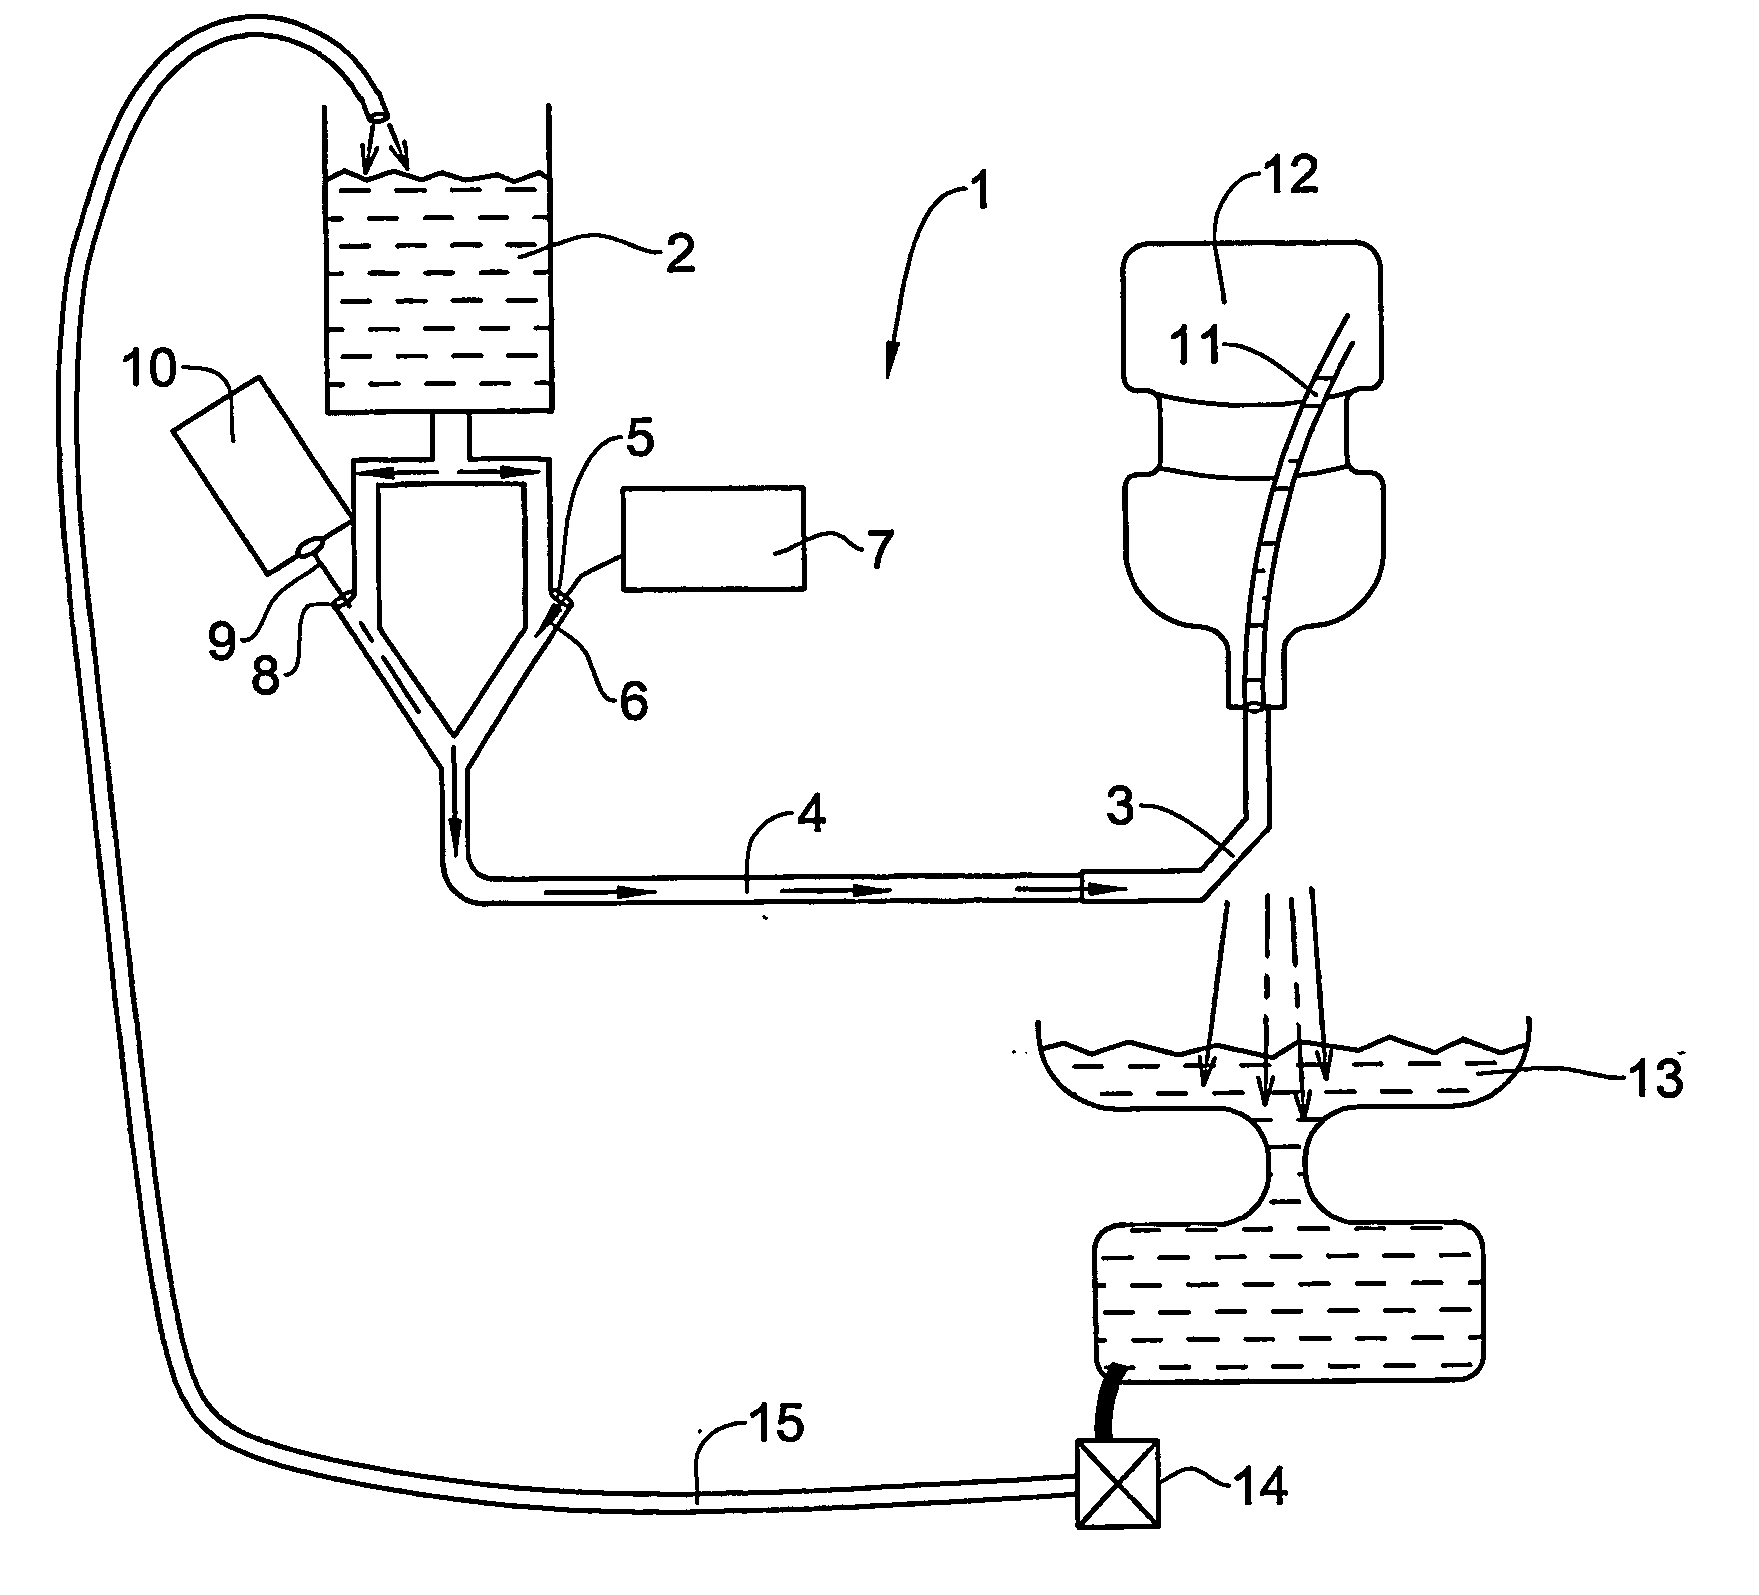 Method for Energy Coupling Especially Useful for Disinfecting, and Various Systems Using It